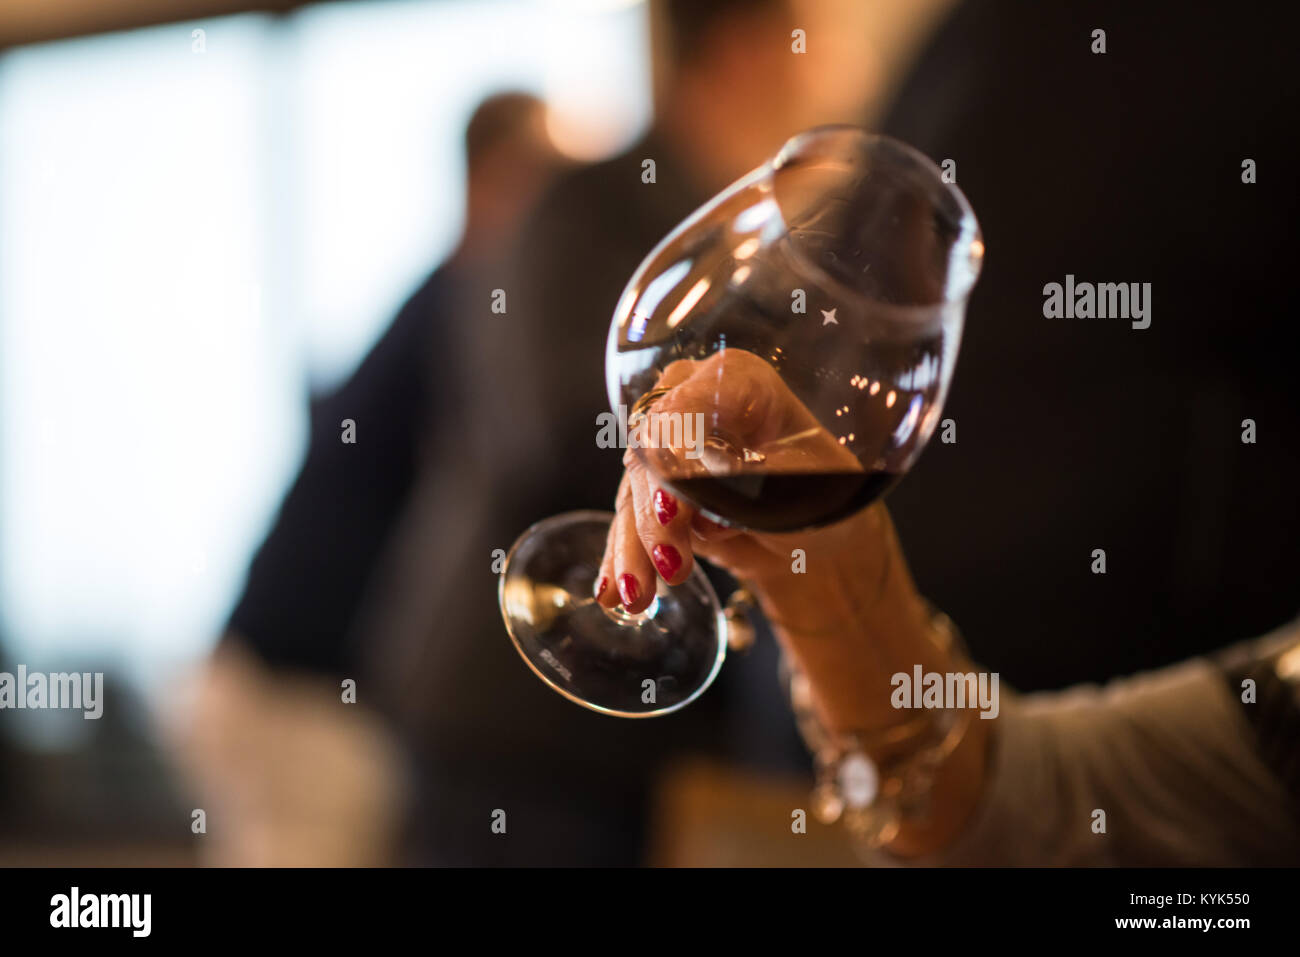 Mixing Wine With Air Stock Photo